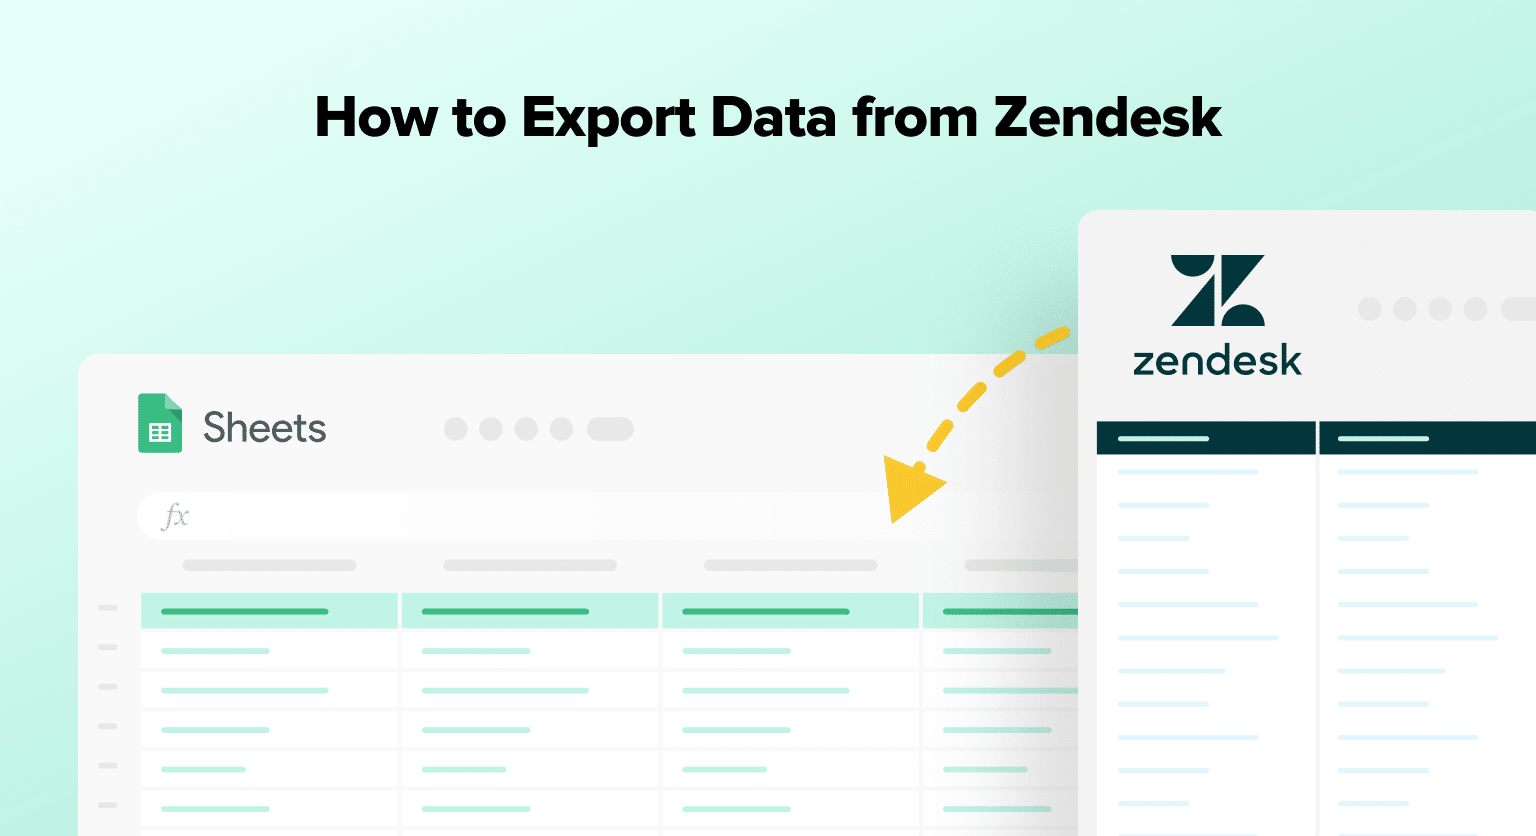 Setting up and using smart links in Sell – Zendesk help